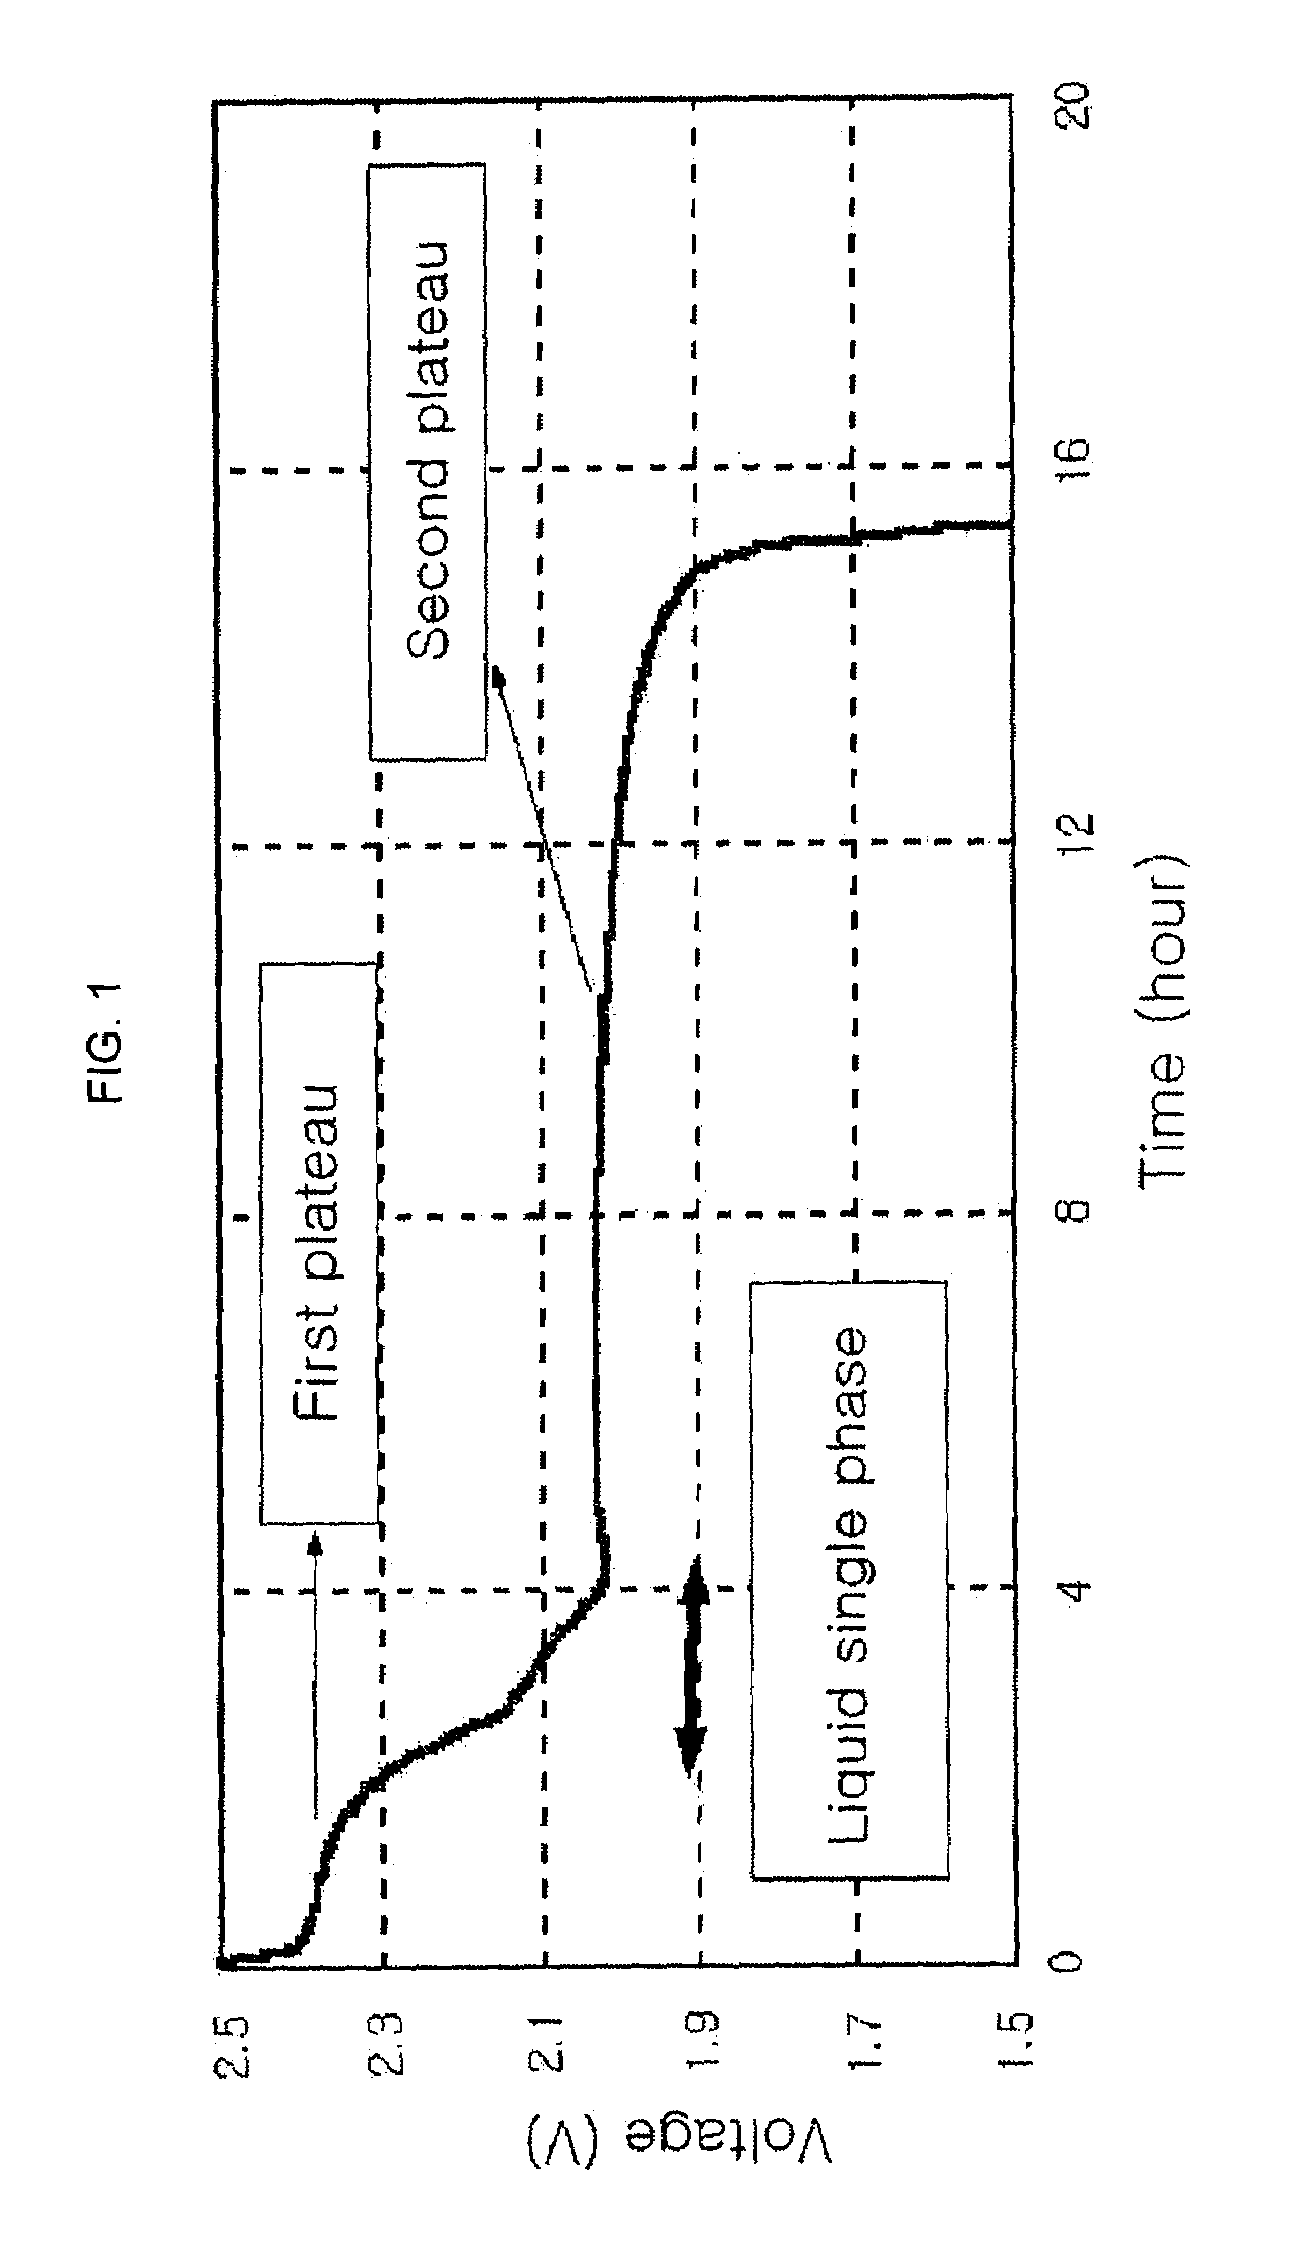 Positive active material of a lithium-sulfur battery and method of fabricating same